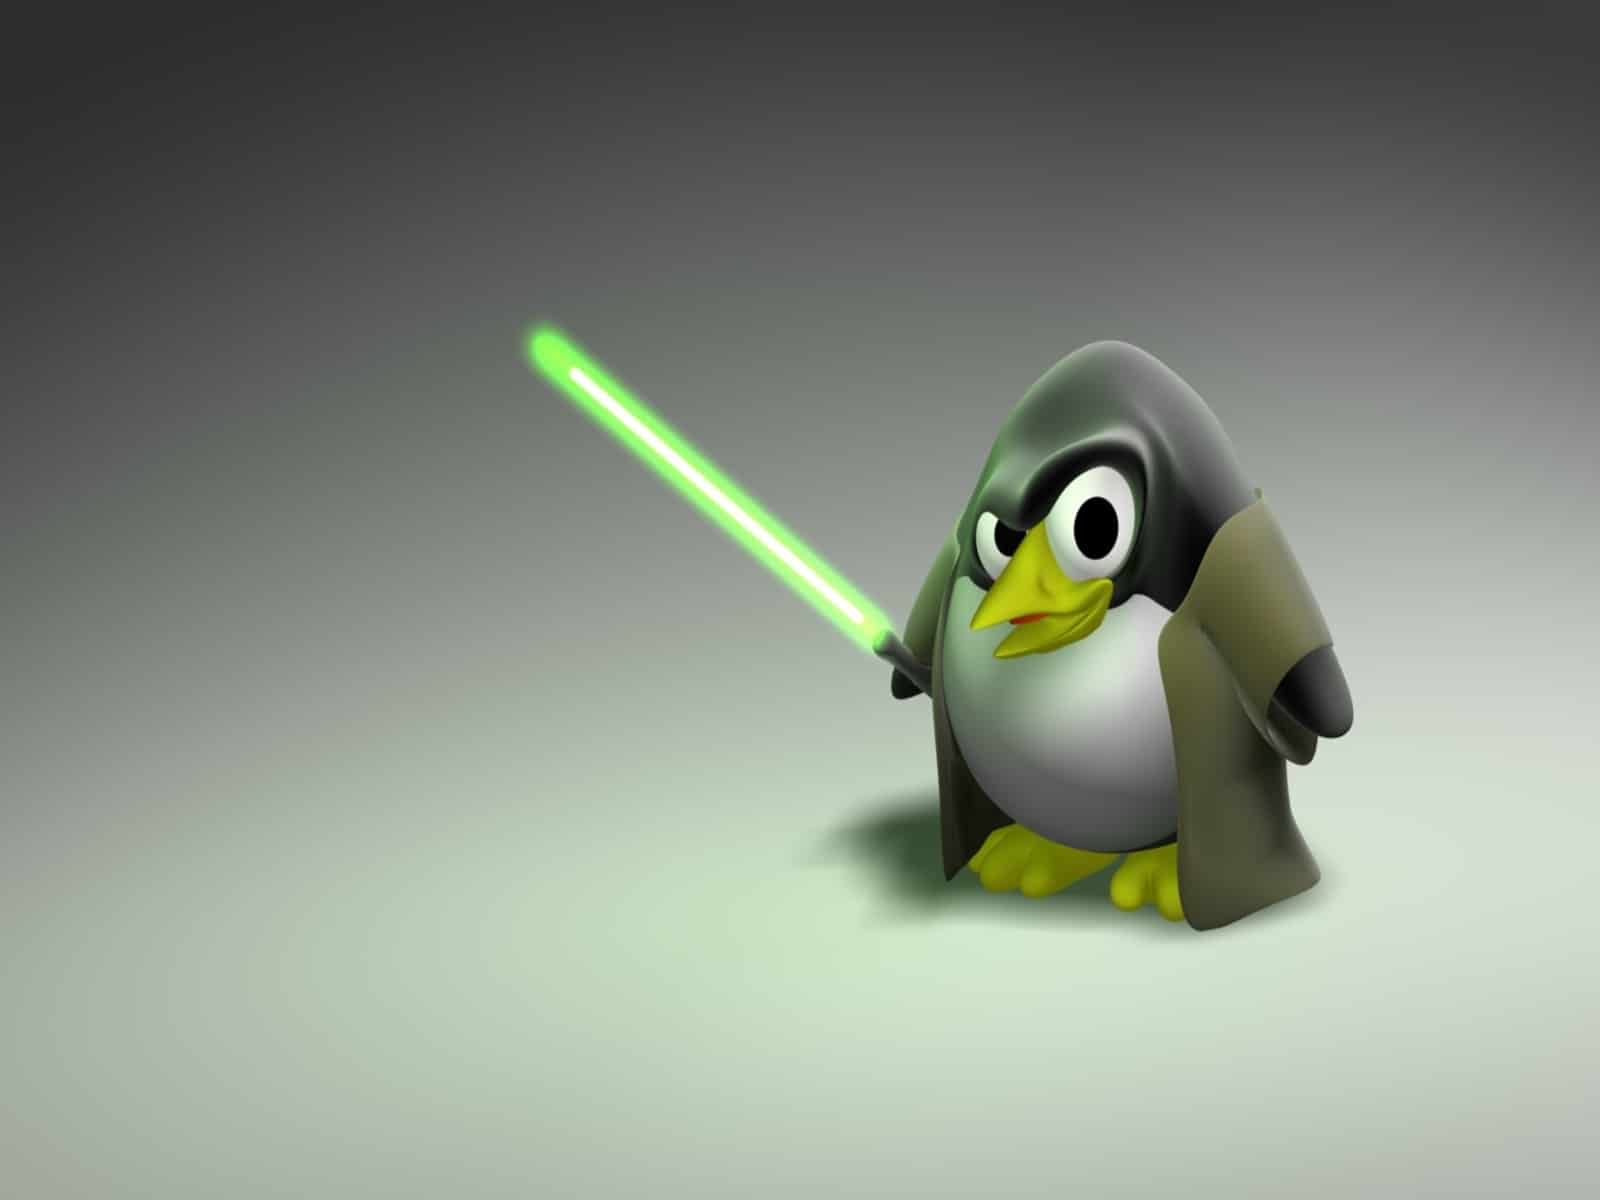 Linux Jedi wallpaper android